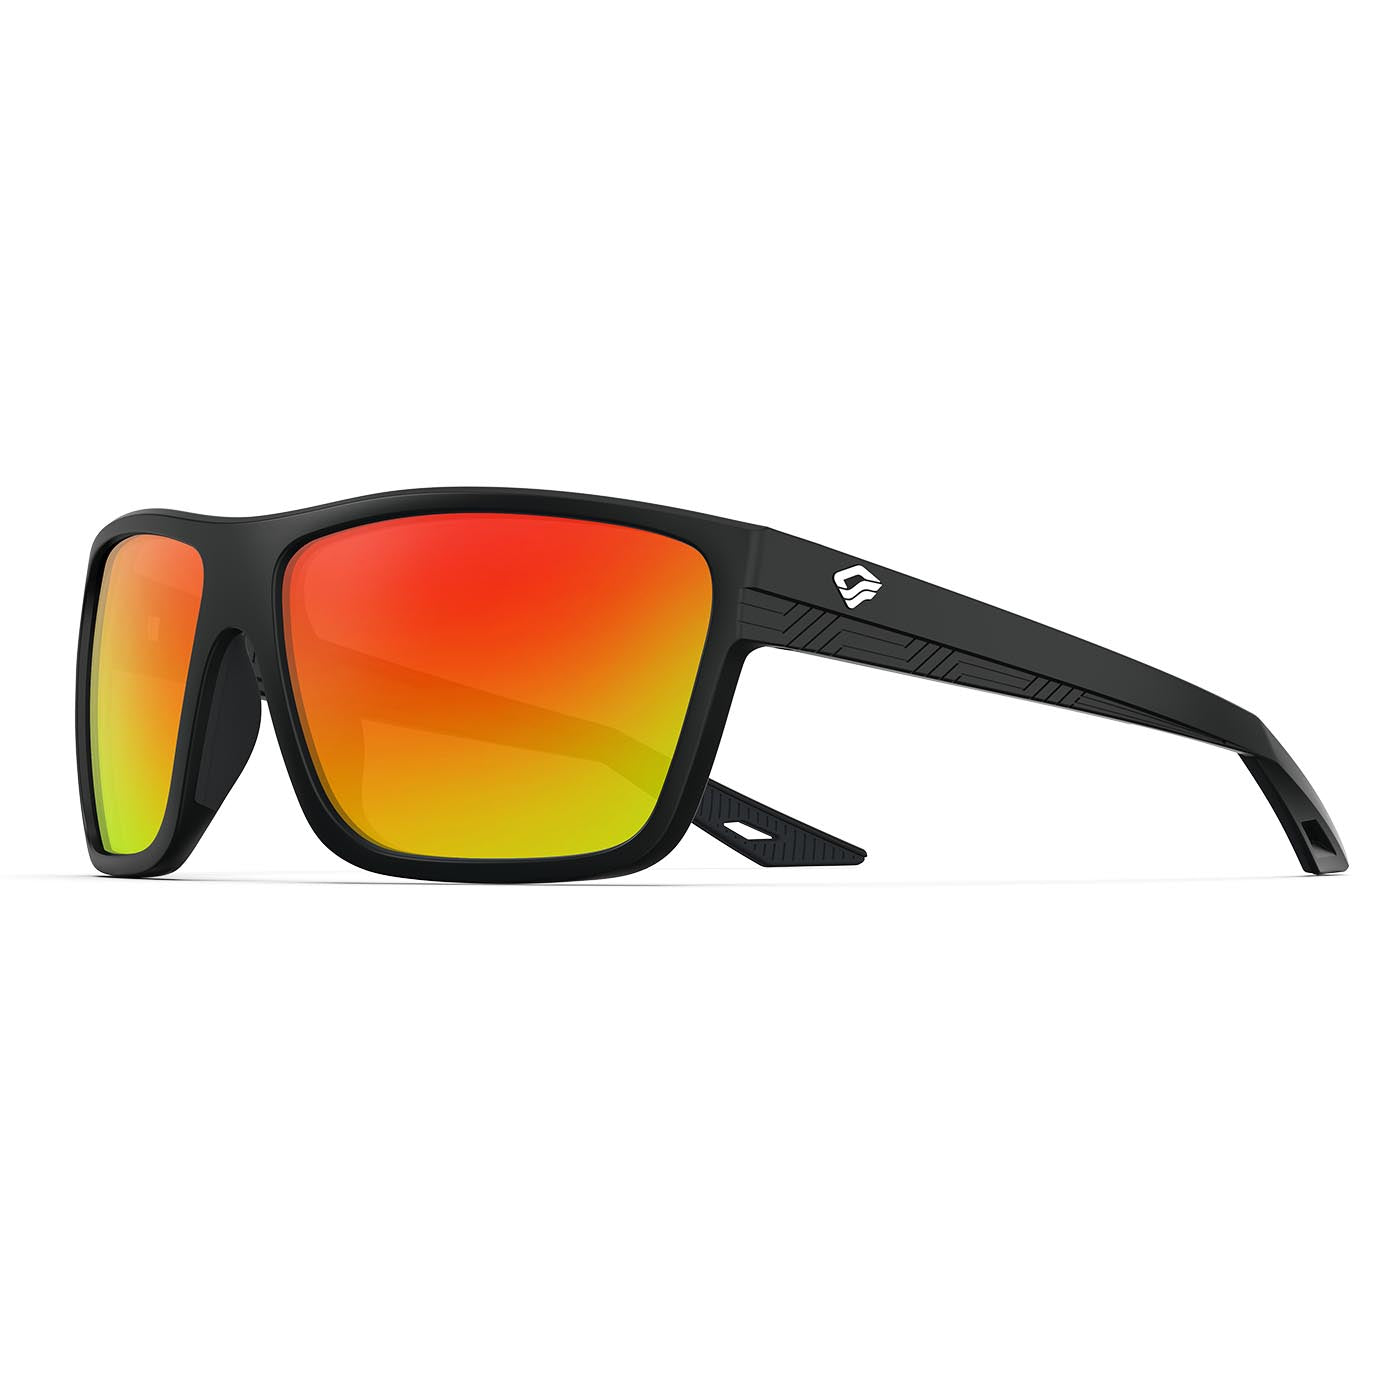 Torege 'Sunlight Rays' Polarized Sports Sunglasses with Lifetime Warranty for Men Women Shooting Cycling Running Golf and Fishing